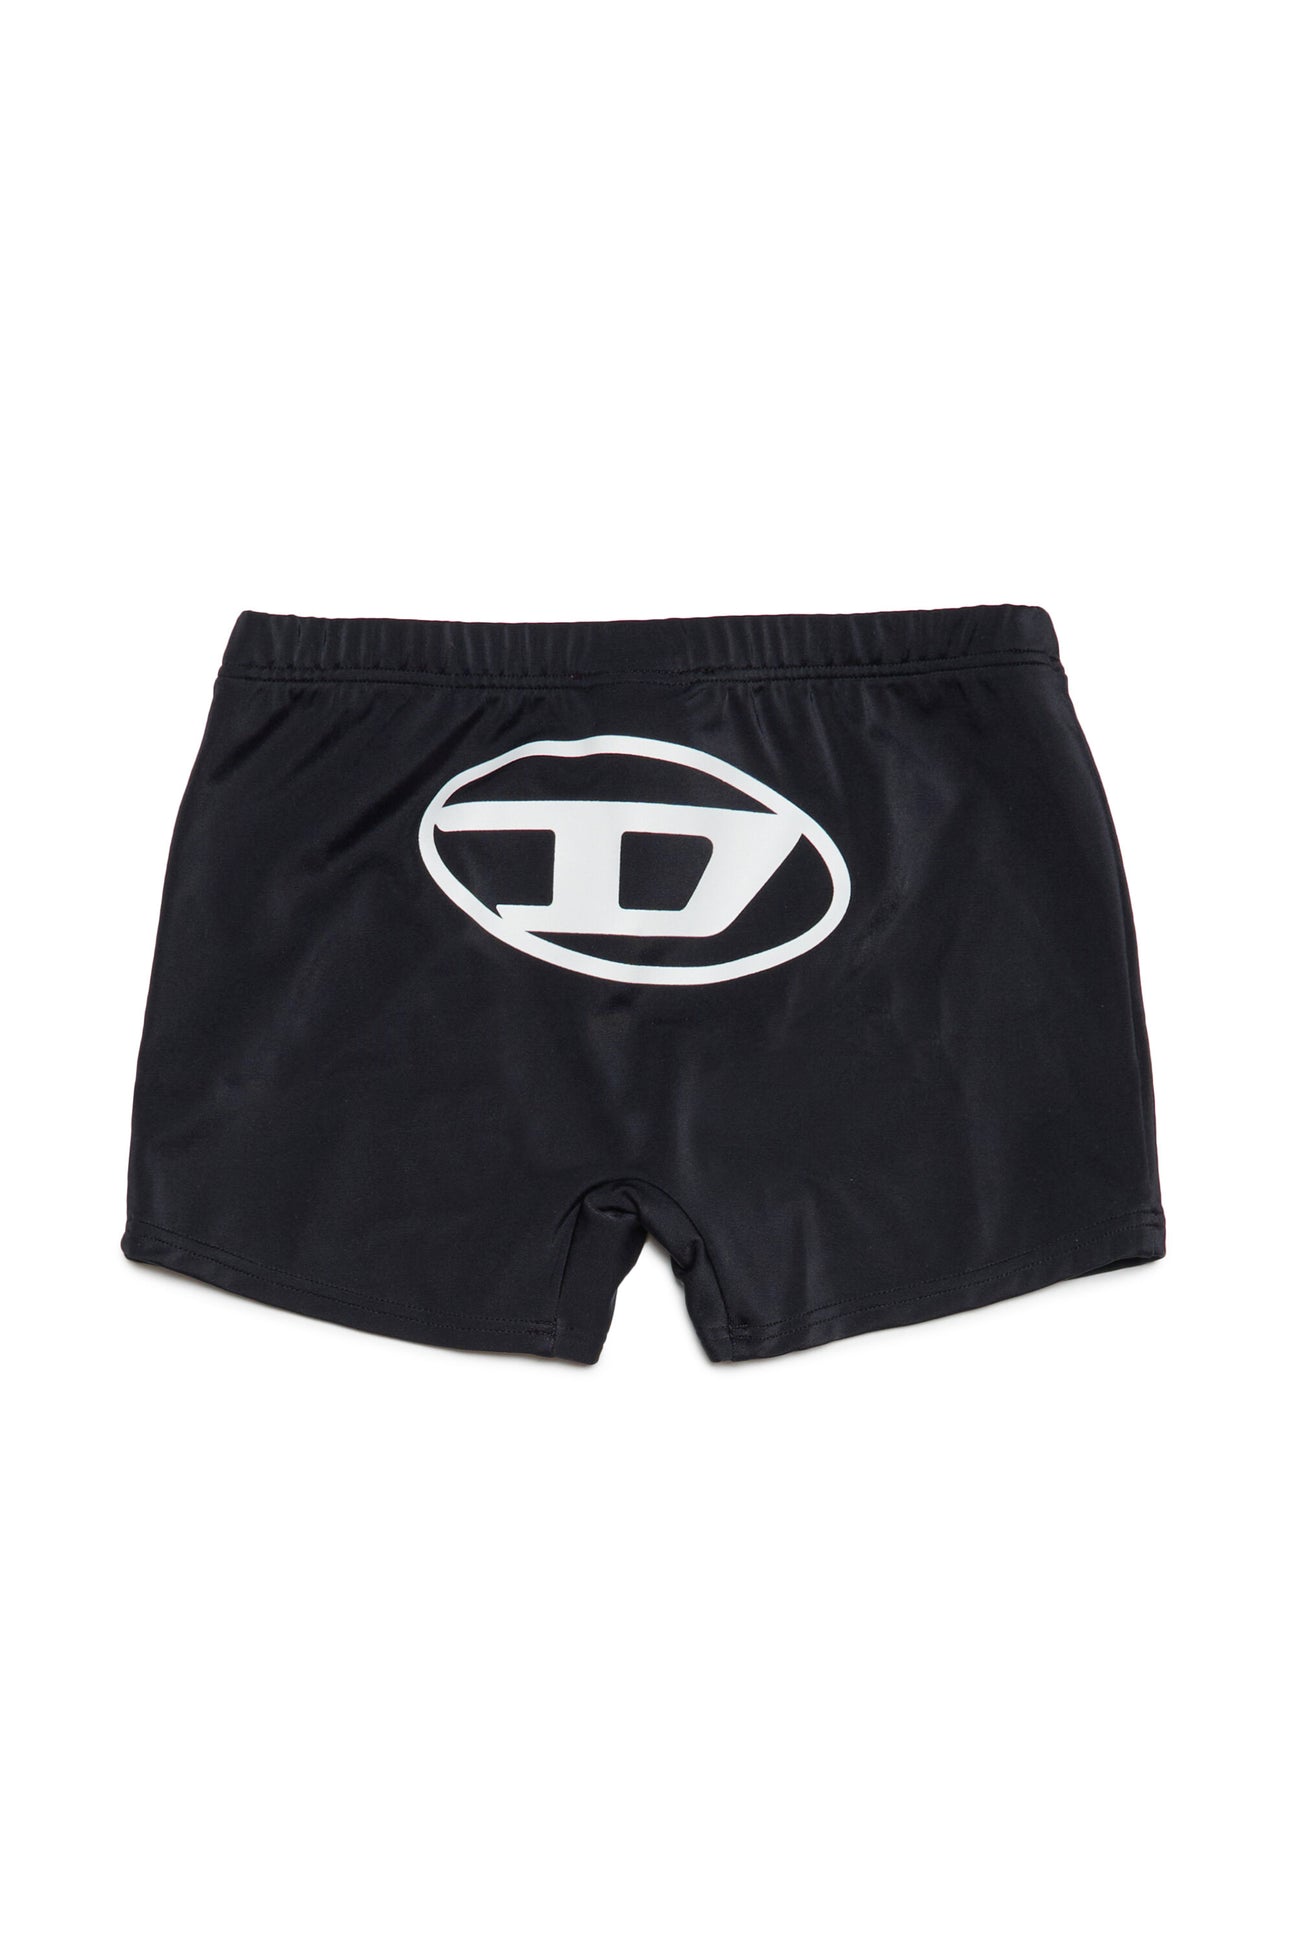 Oval D branded boxer swimsuit Oval D branded boxer swimsuit